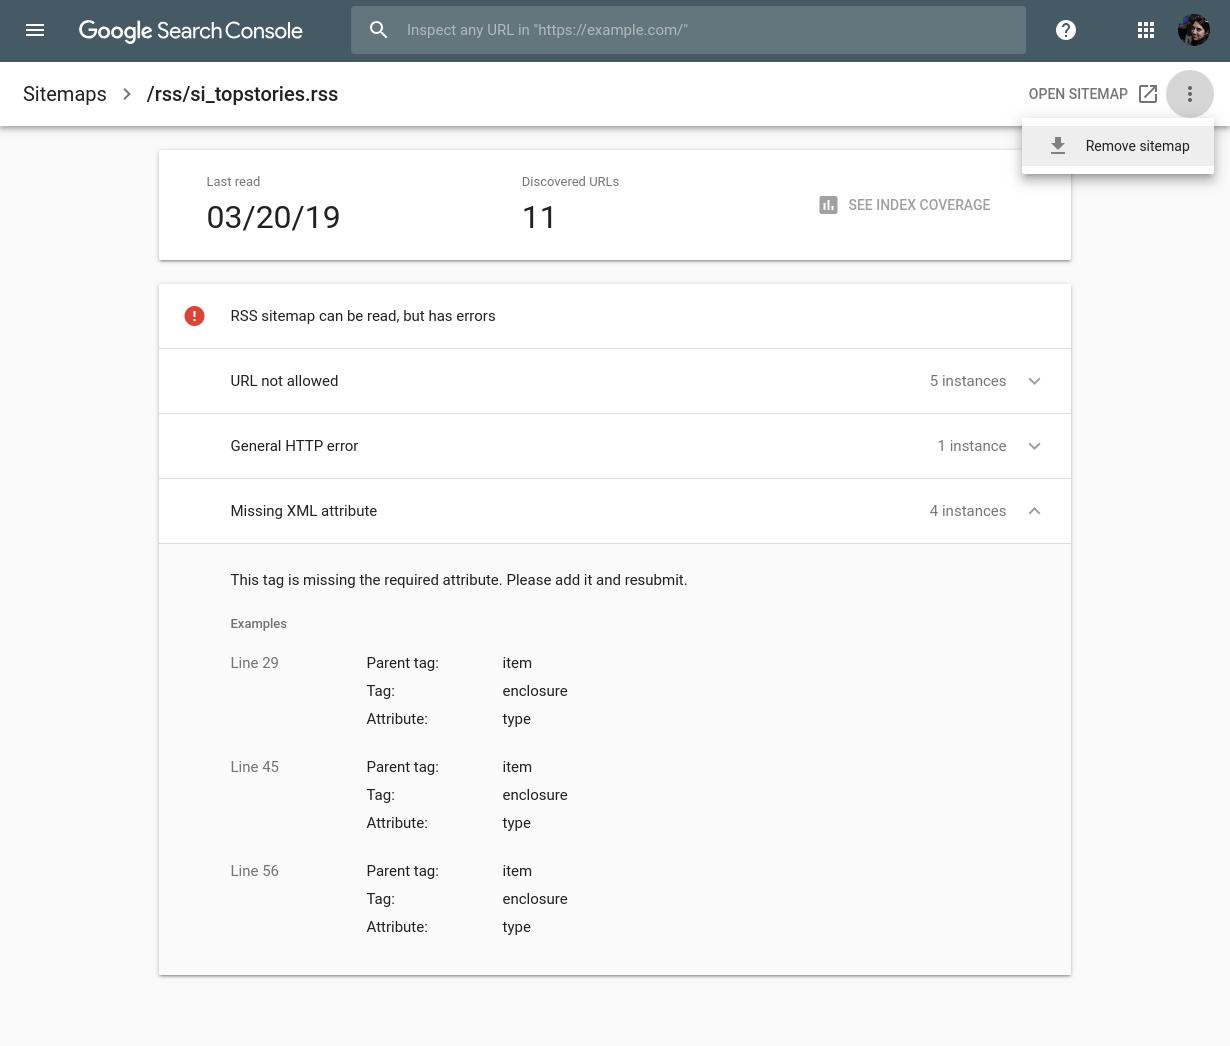 Google Updates the Sitemaps Report in Search Console &#038; Adds Ability to Delete Sitemaps